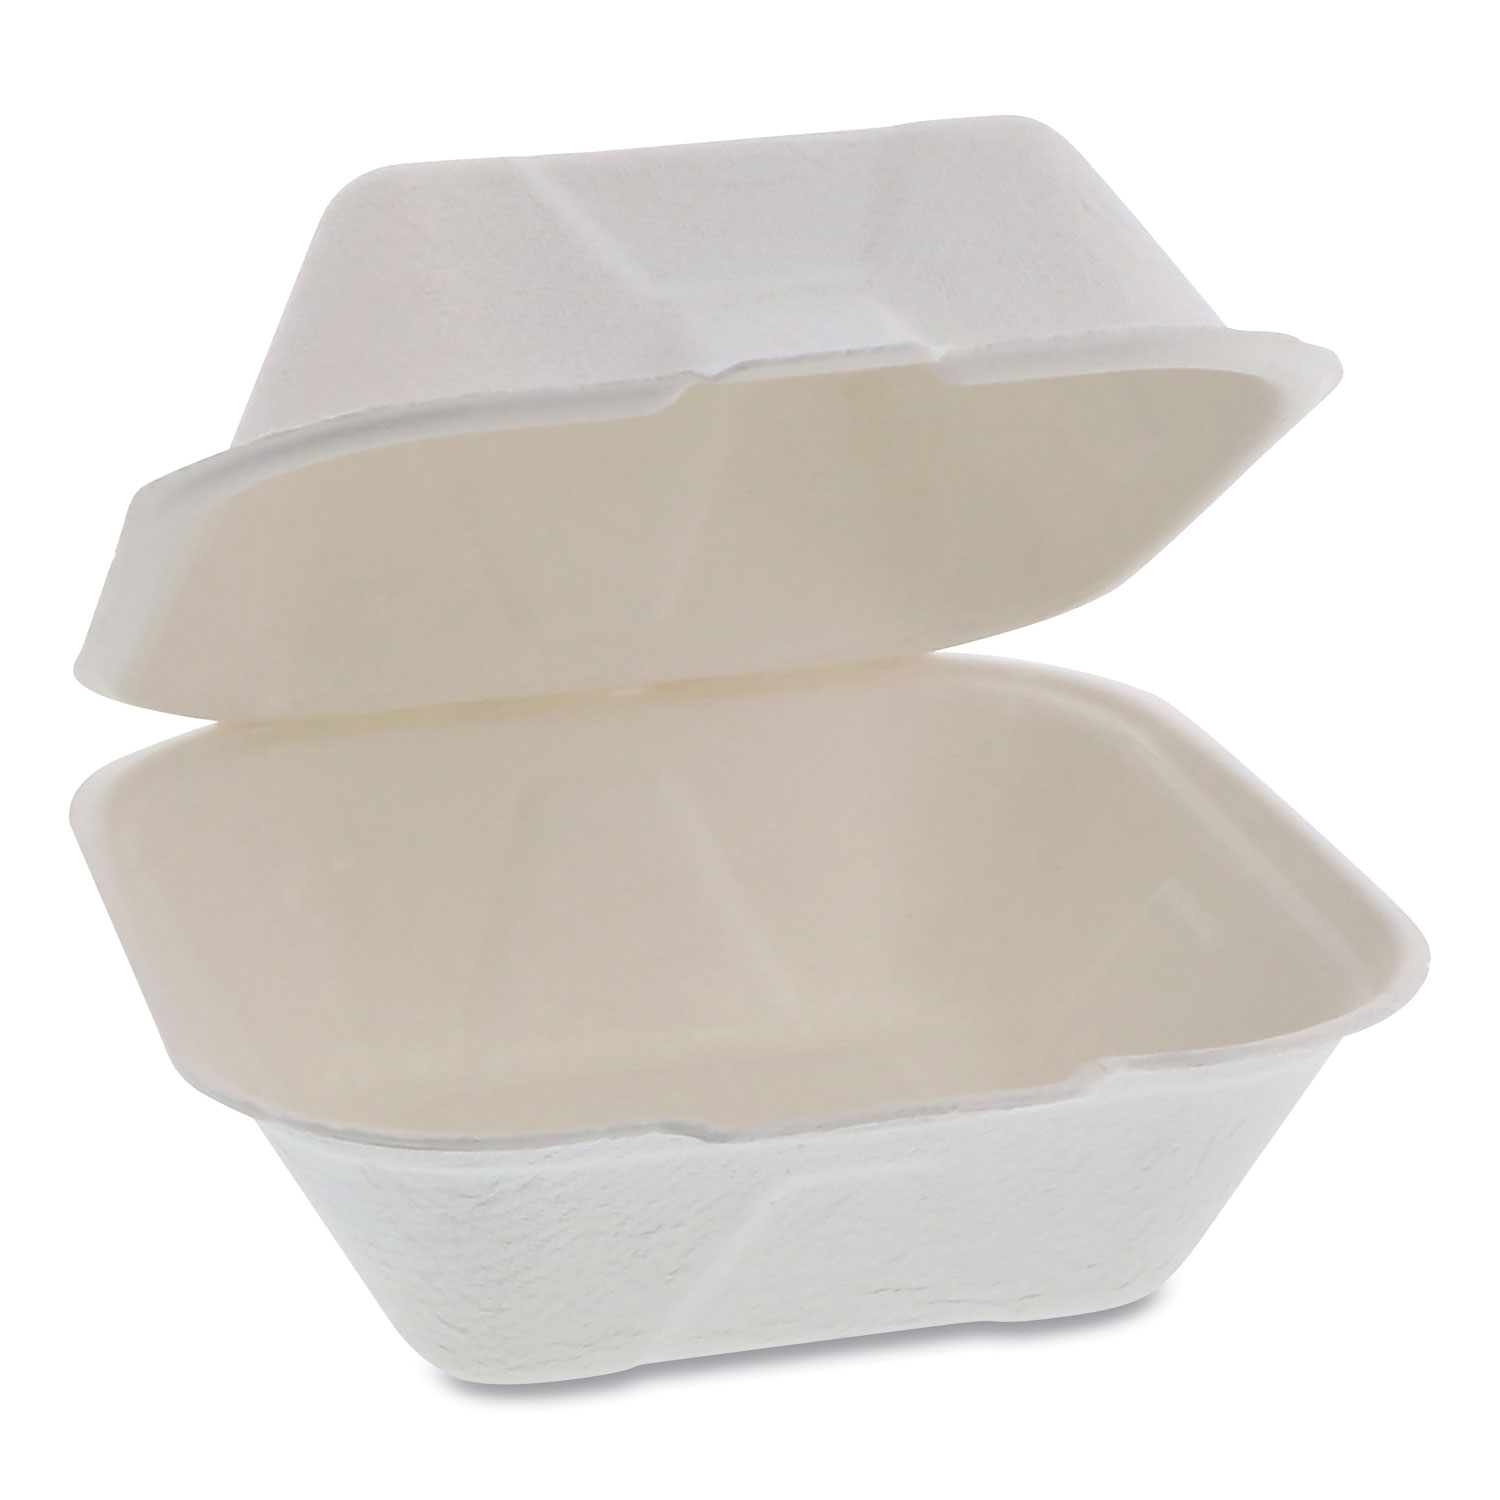  Pactiv YMCH00800001 EarthChoice Bagasse Hinged Lid Container, 5.8 x 5.8 x 3.3, 1-Compartment, Natural, 500/Carton (PCTYMCH00800001) 